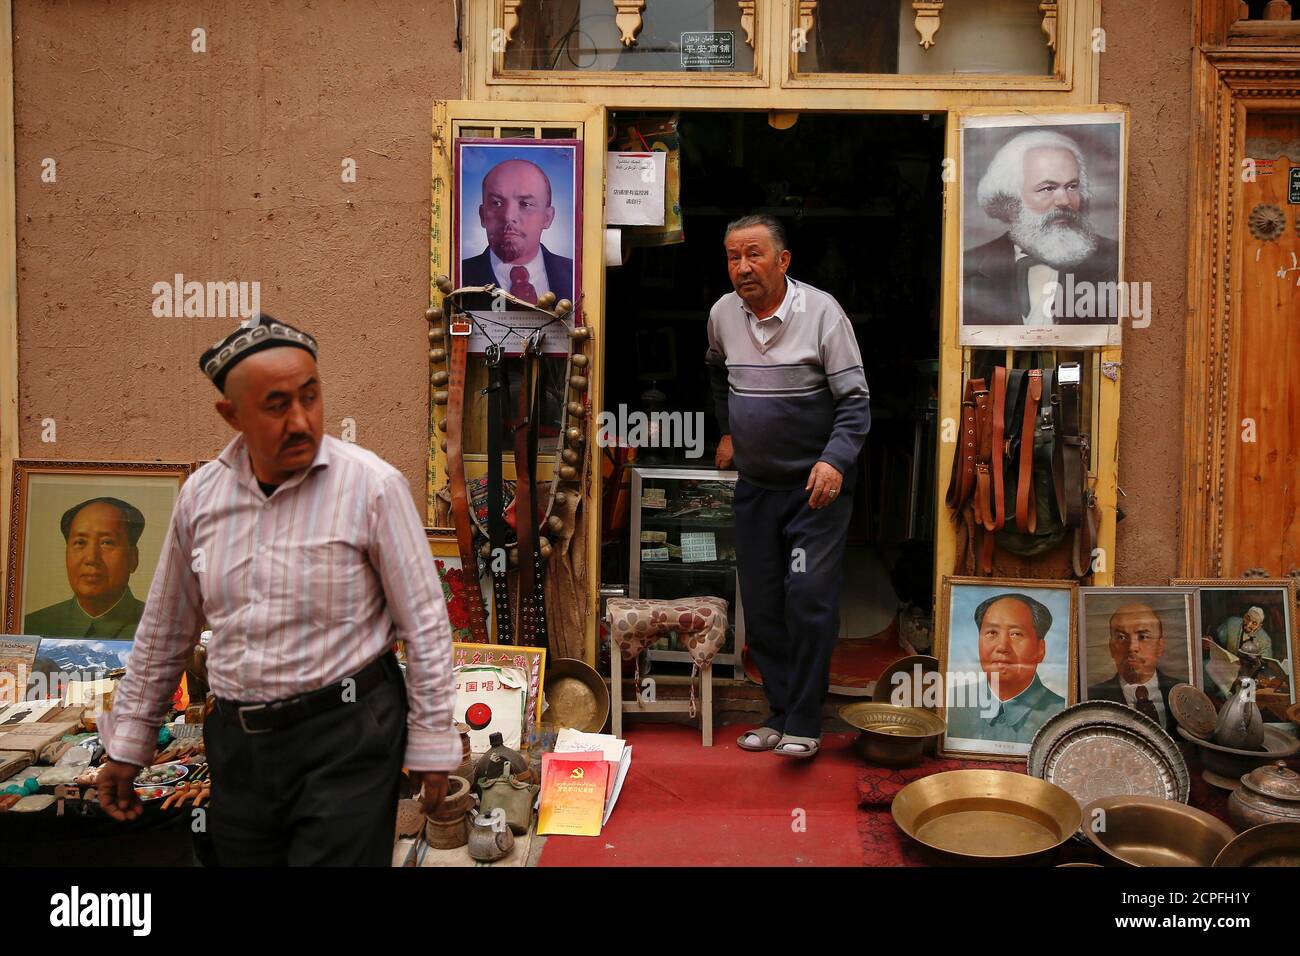 Portraits of China's late Chairman Mao Zedong, Soviet state founder Vladimir Lenin and German philosopher Karl Marx are displayed outside an antique shop in the old town in Kashgar, Xinjiang Uighur Autonomous Region, China, March 22, 2017.  REUTERS/Thomas Peter SEARCH "XINJIANG PETER" FOR THIS STORY. SEARCH "WIDER IMAGE" FOR ALL STORIES. Banque D'Images